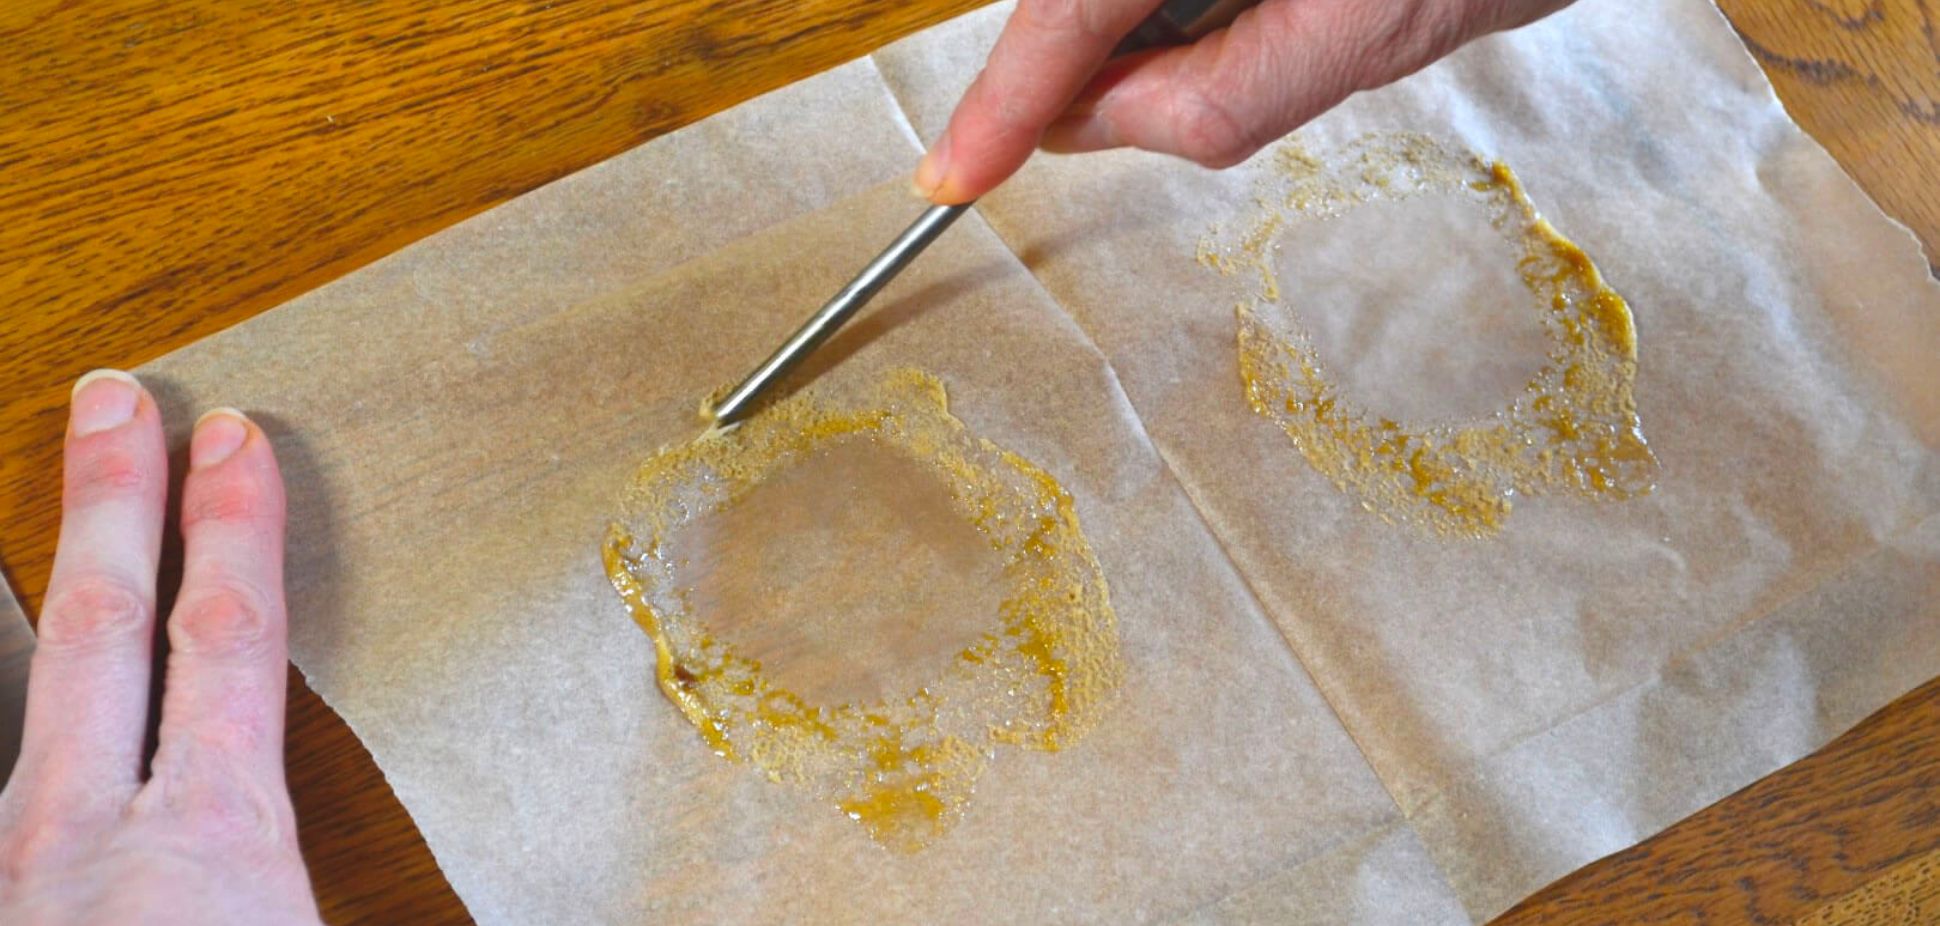 Get Your Squeeze On: The Art of Making Rosin